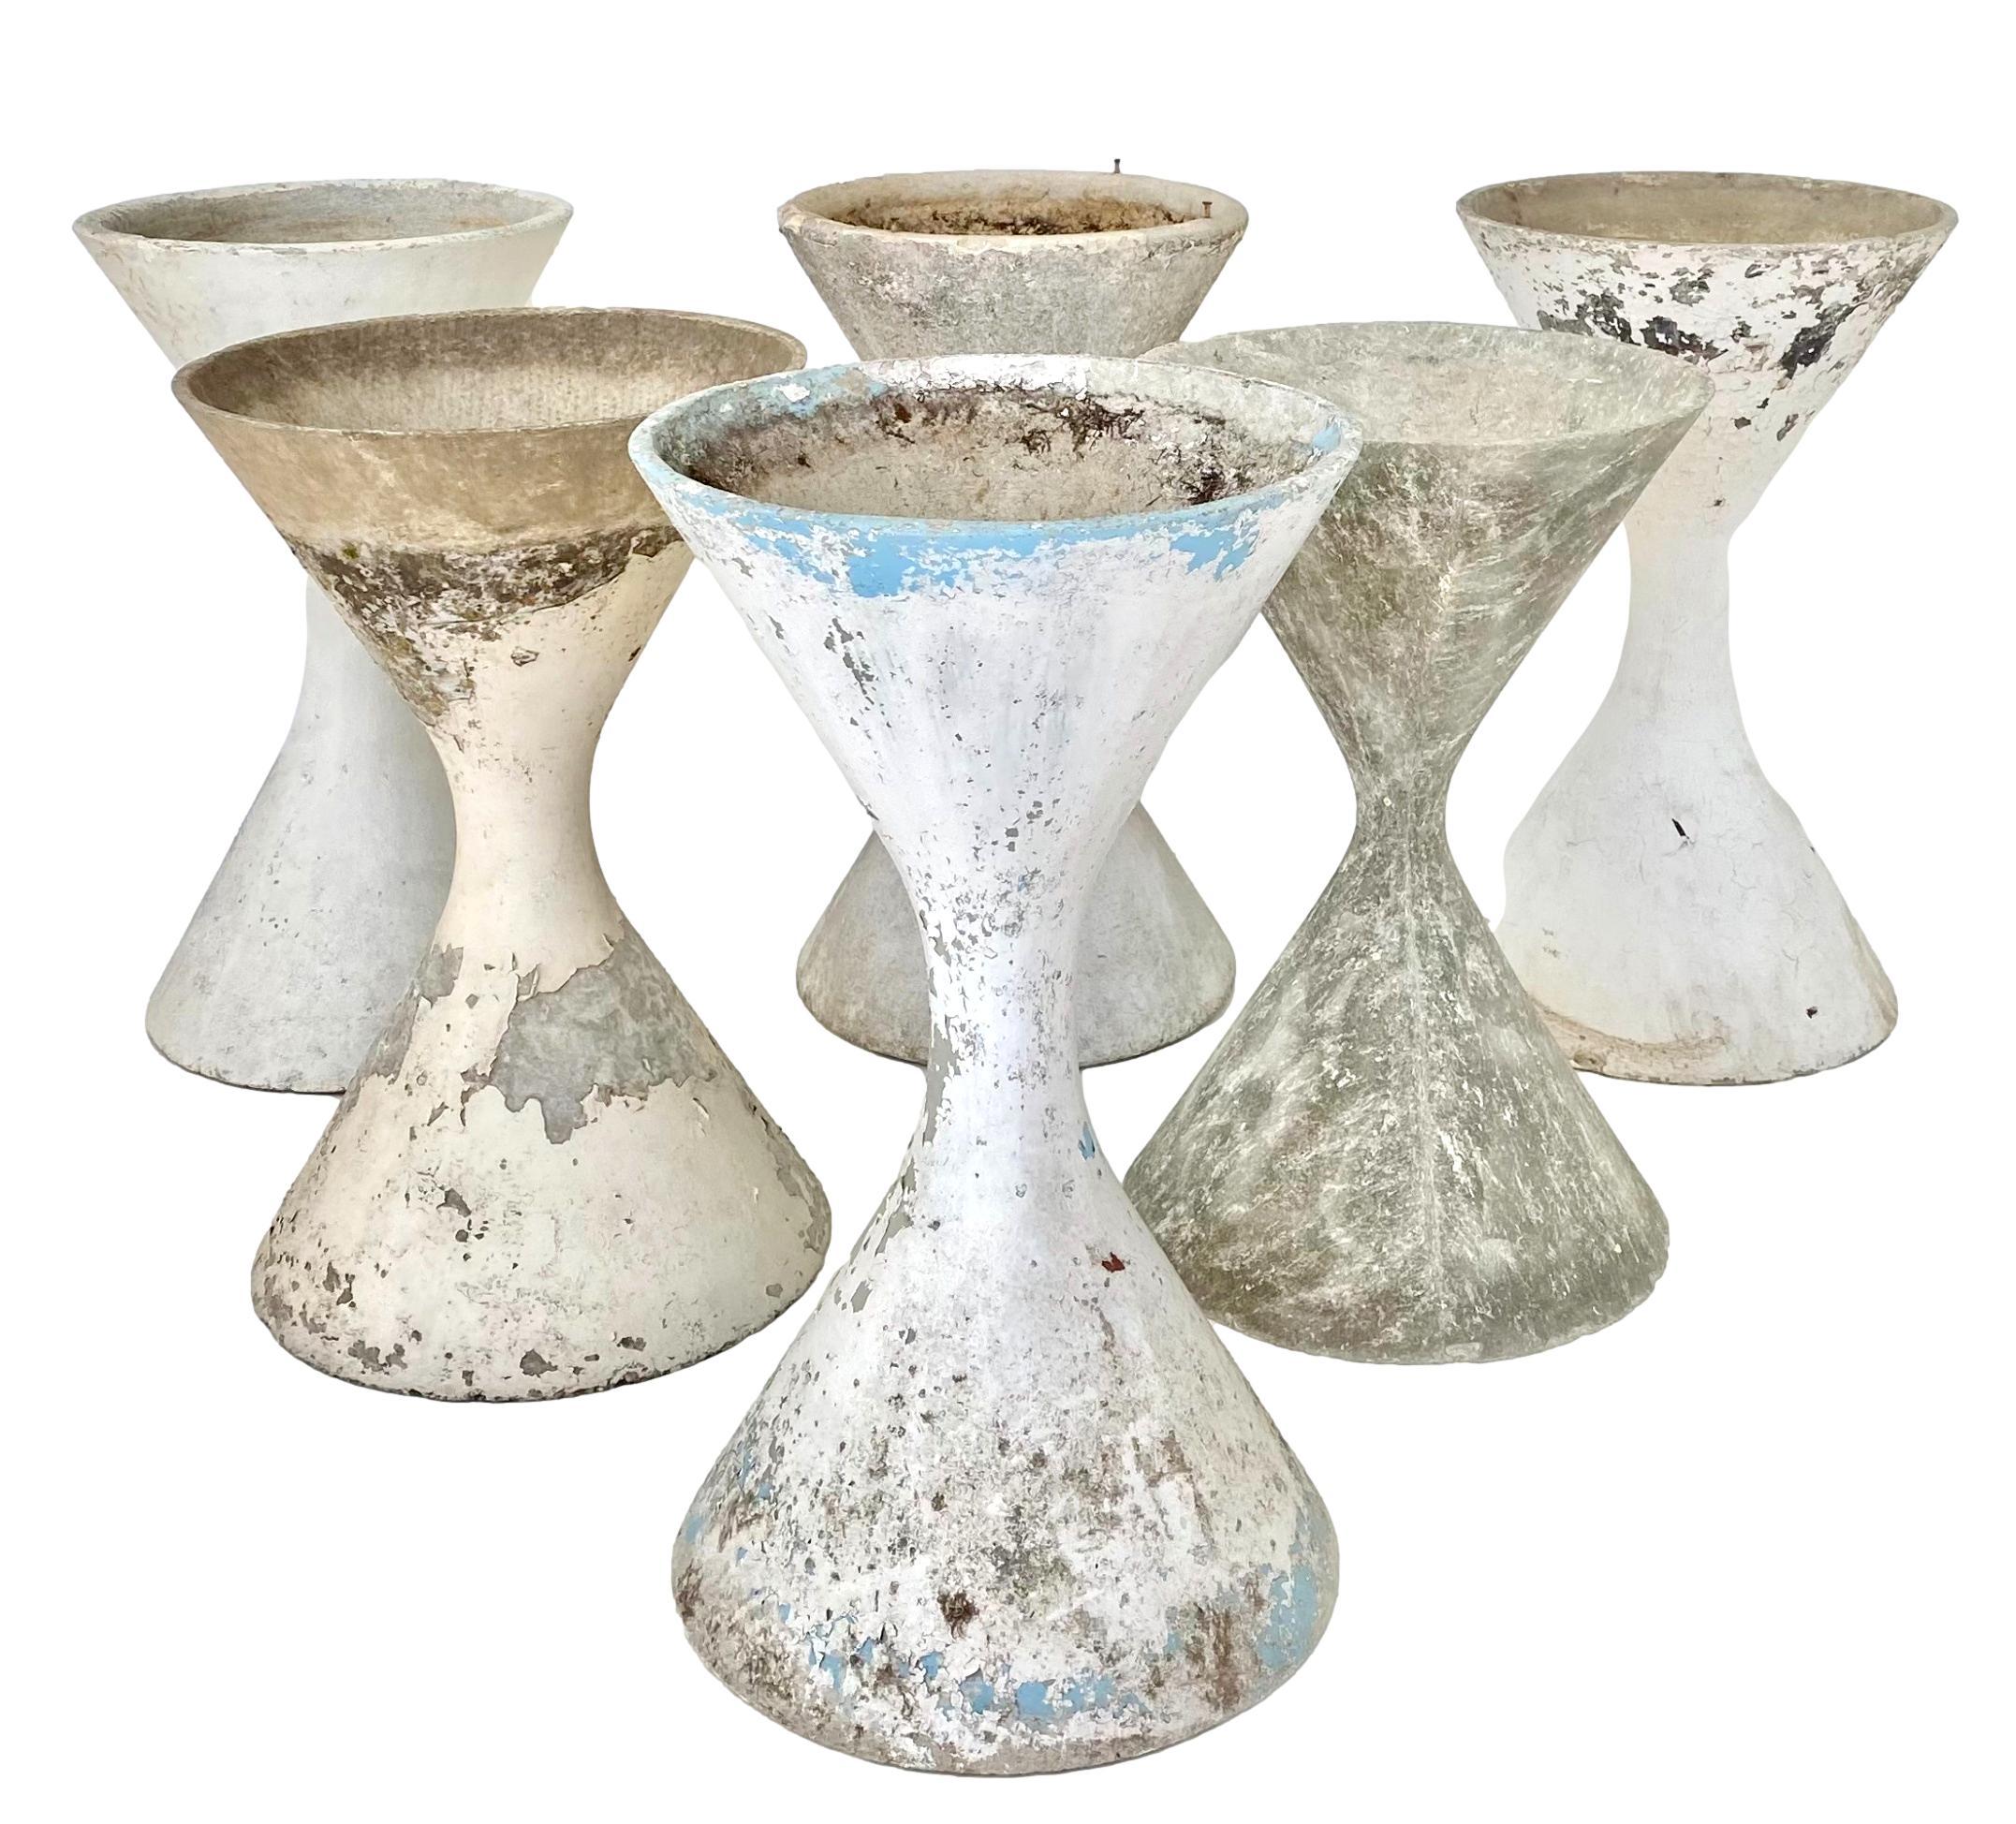 Concrete diabolo planter by Swiss Designer Willy Guhl. Varying degrees of patina to each planter. Available in multiple sizes and quantities. 

*8 available in this size. Priced individually.

Extra large 37